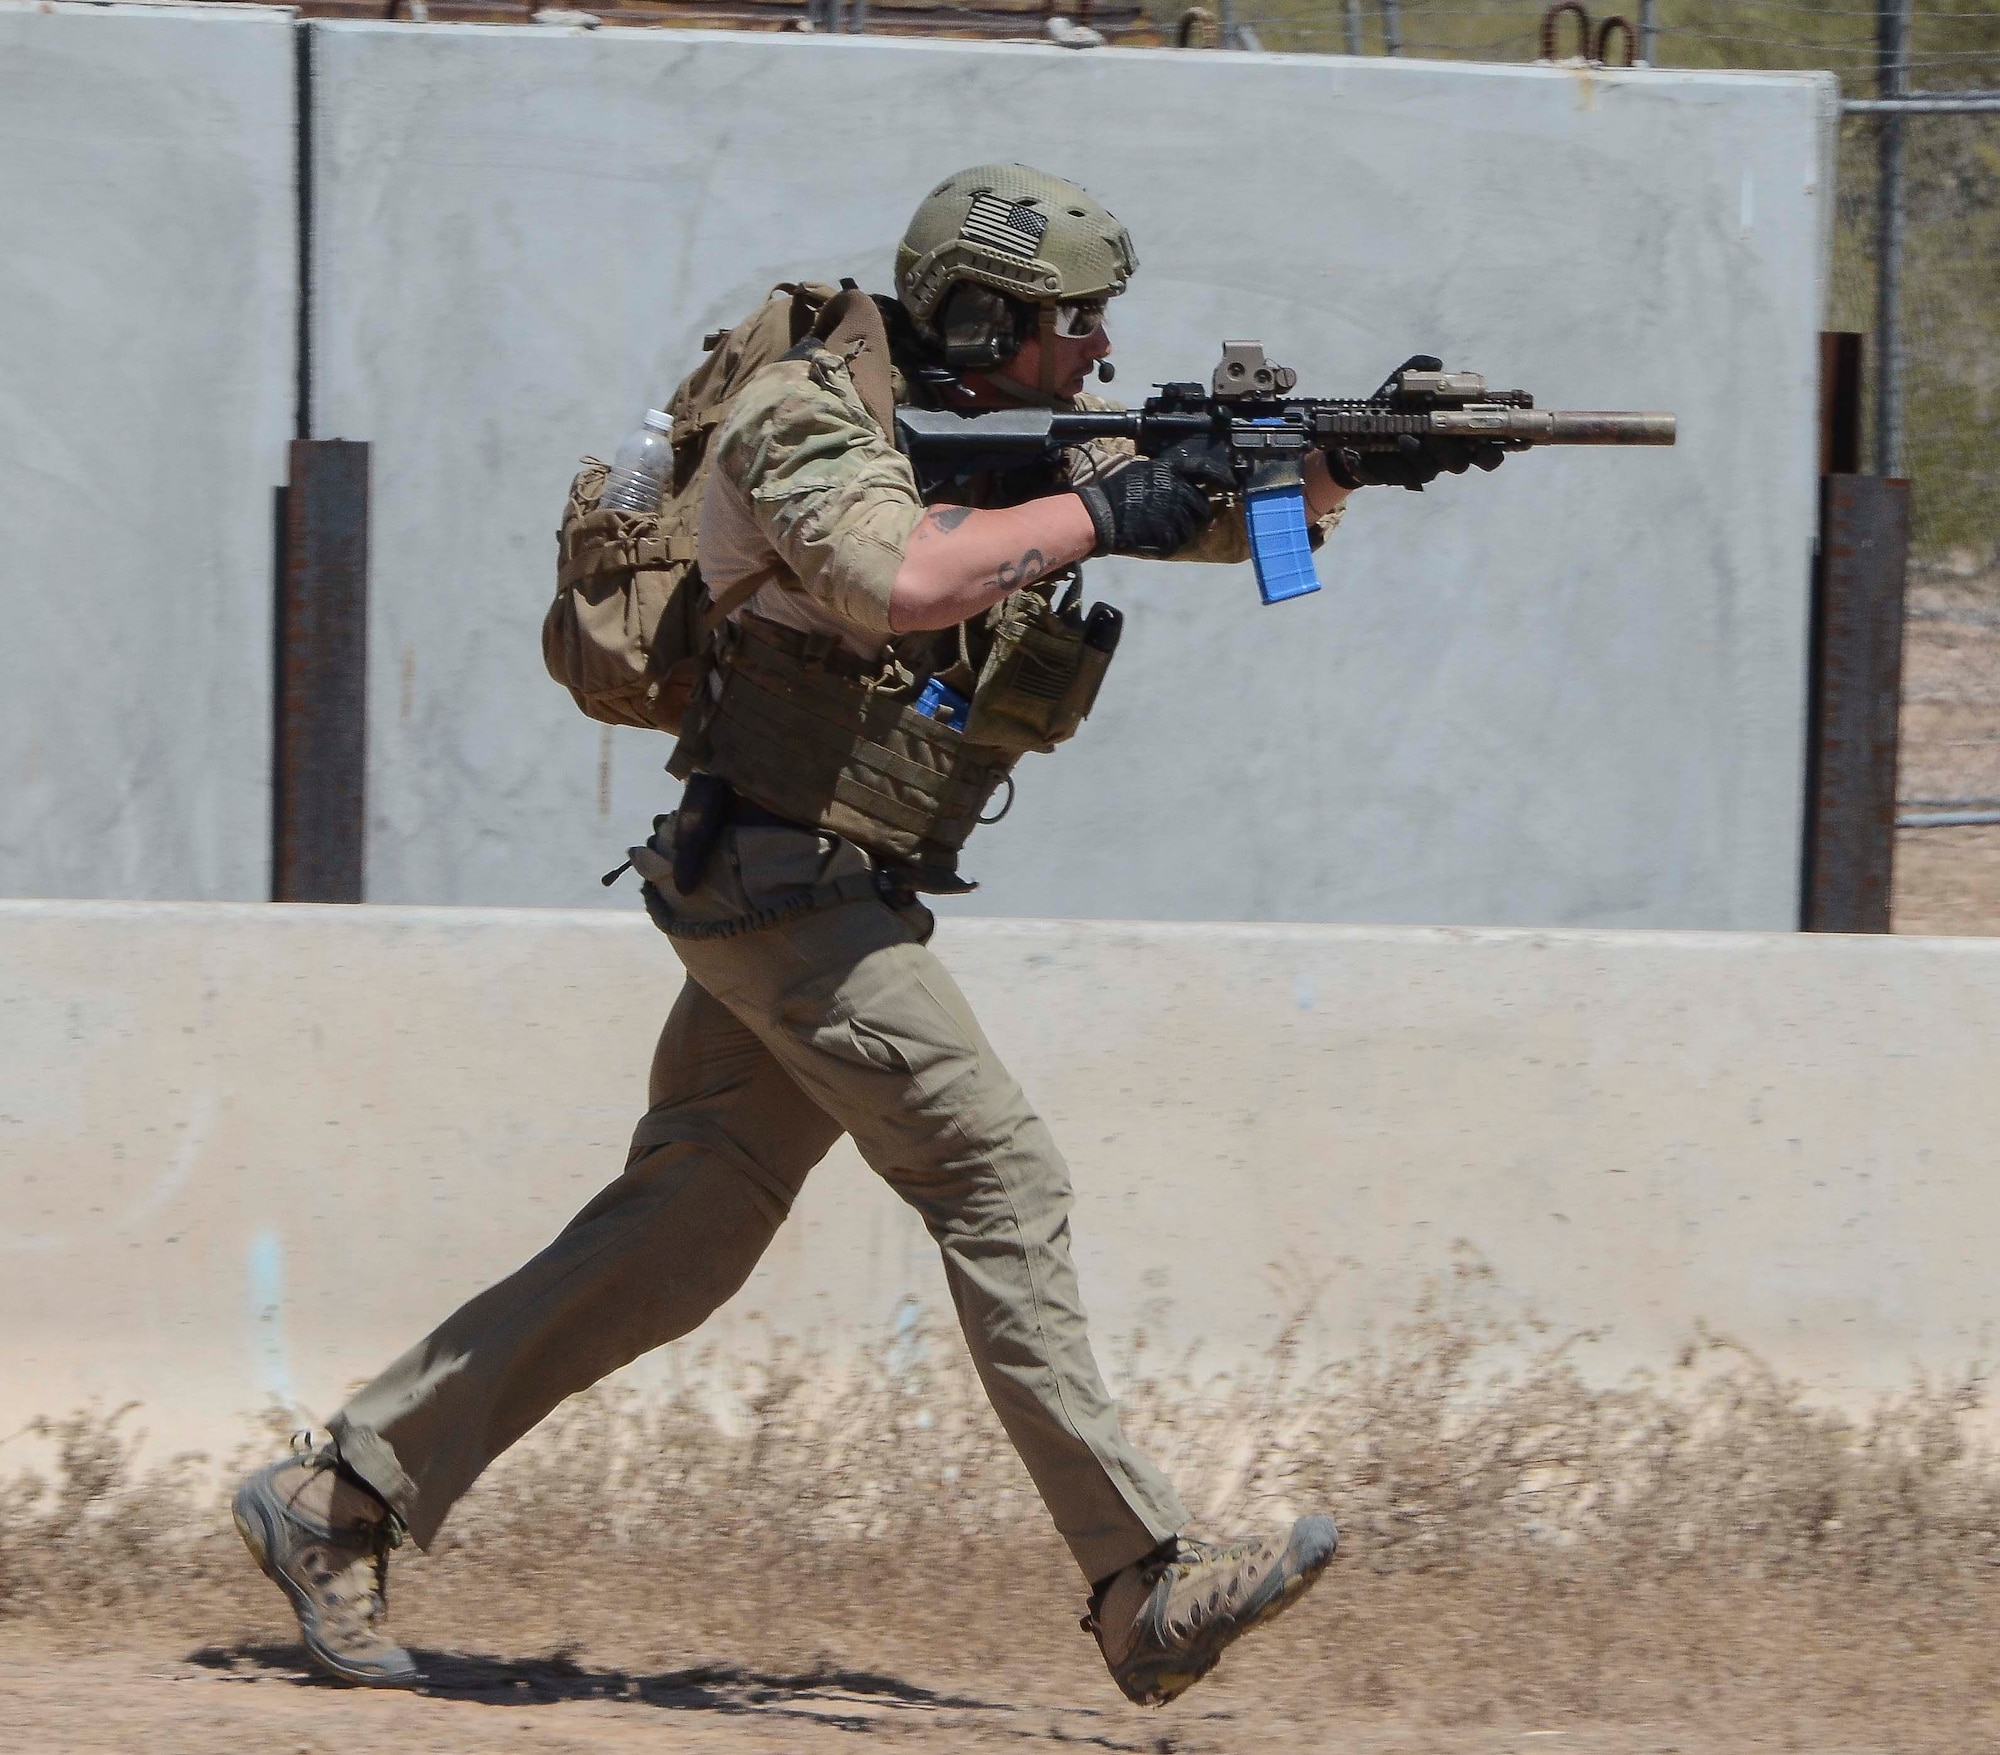 A member of a Multinational Combat Search and Rescue team sprints to a forward location during a training mission in Exercise ANGEL THUNDER on May 16, 2014 at the Florence Military Reservation, Ariz. ANGEL THUNDER 2014 is the largest and most realistic joint service, multinational, interagency combat search and rescue exercise designed to provide training for personnel recovery assets using a variety of scenarios to simulate deployment conditions and contingencies. Personnel recovery forces will train through the full spectrum of personnel recovery capabilities with ground recovery personnel, air assets, and interagency teams. (U.S. Air Force photo by Staff Sgt. Adam Grant/Released)